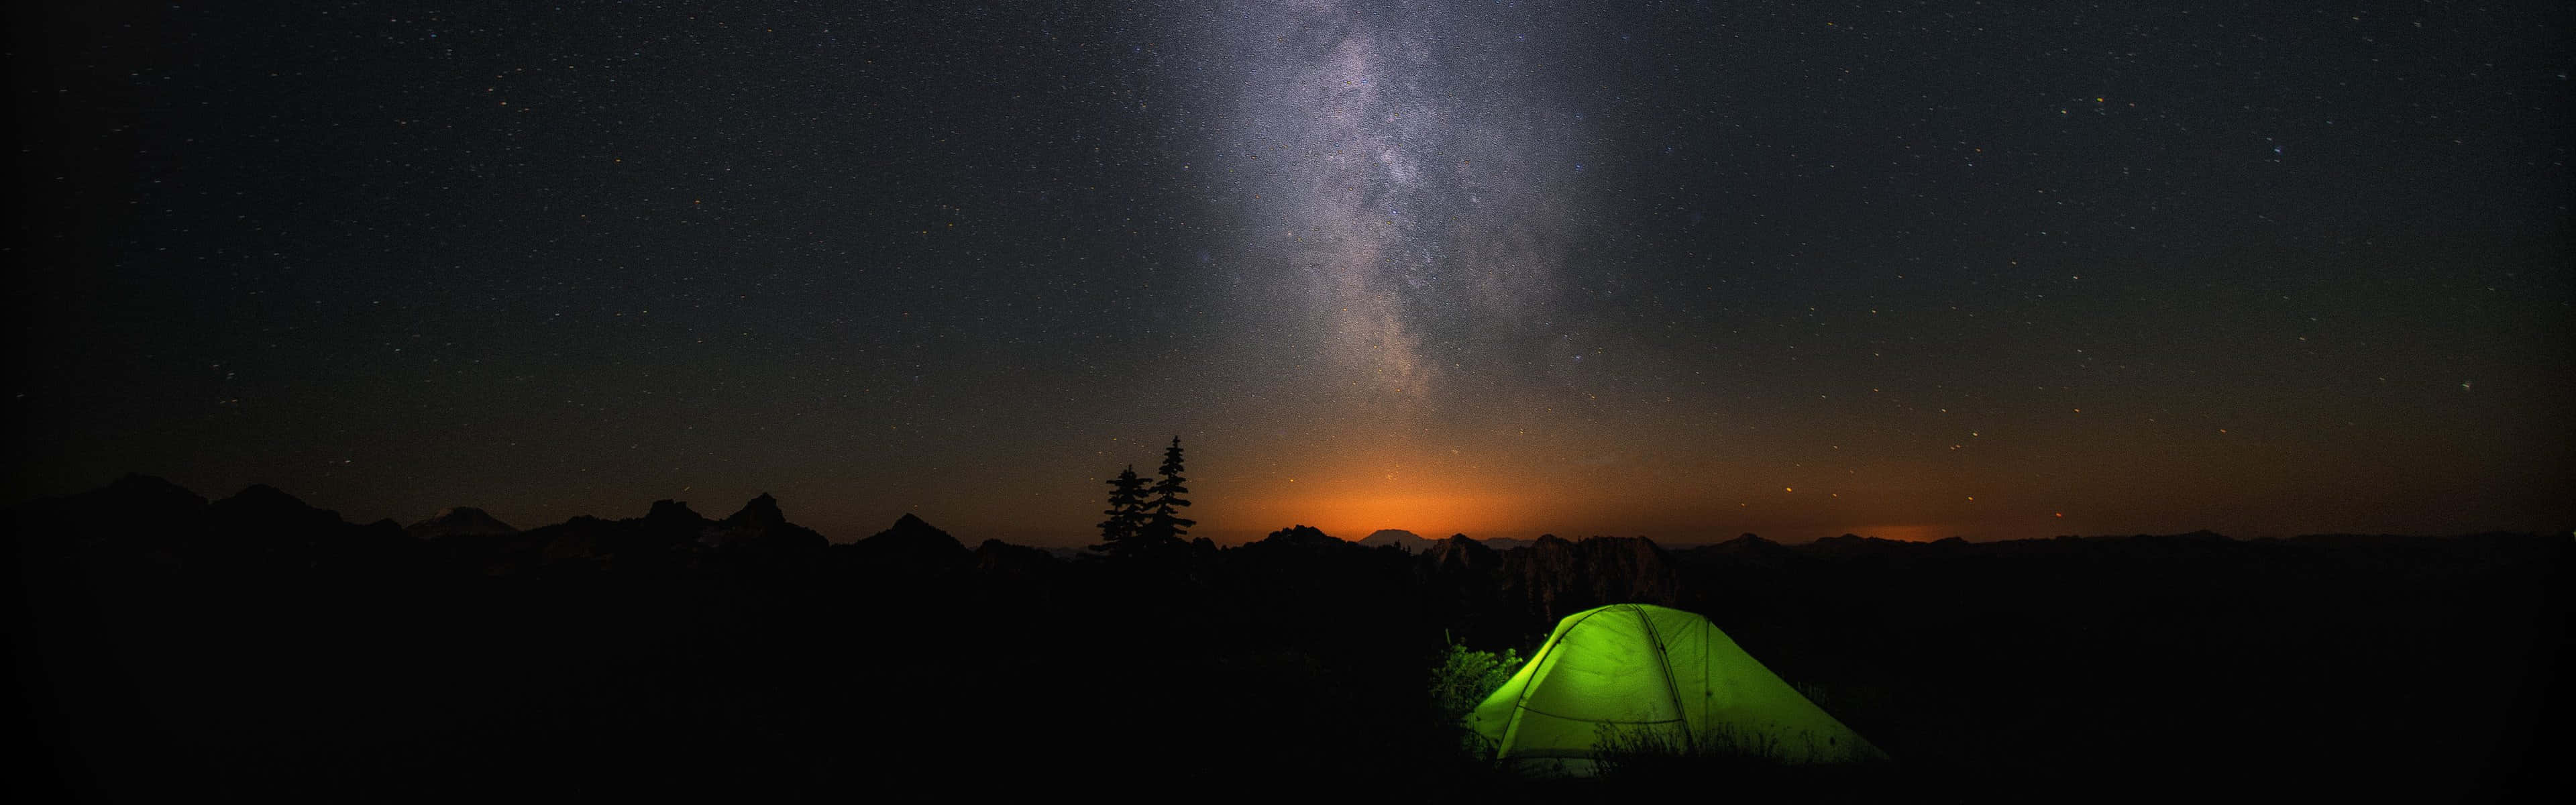 A Tent Is Lit Up Under The Milky Background